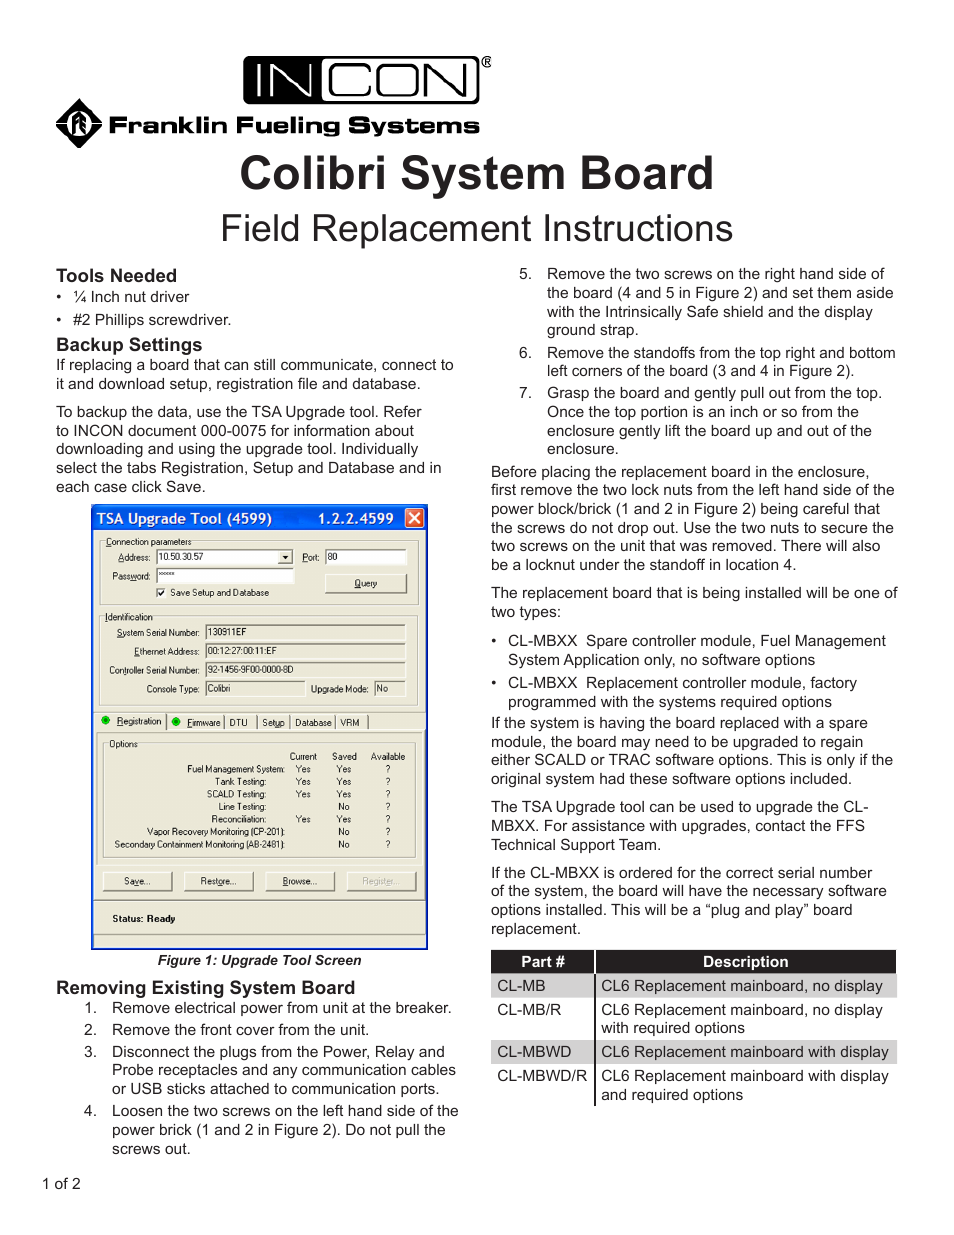 Colibri System Board Replacement (Page 1)